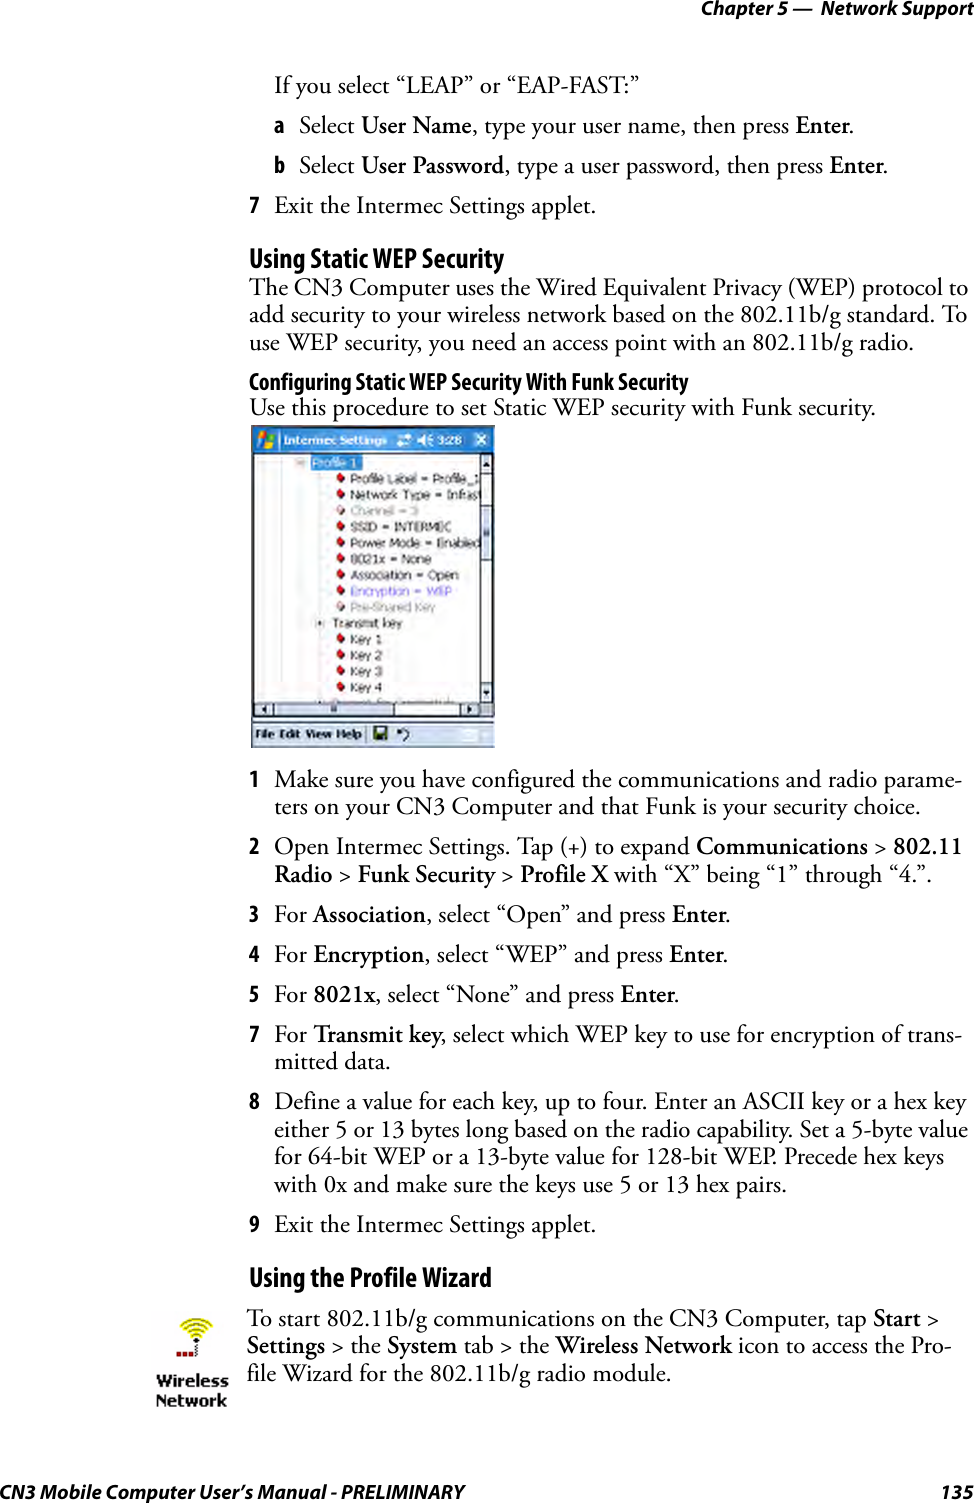 Chapter 5 —  Network SupportCN3 Mobile Computer User’s Manual - PRELIMINARY 135If you select “LEAP” or “EAP-FAST:”aSelect User Name, type your user name, then press Enter.bSelect User Password, type a user password, then press Enter.7Exit the Intermec Settings applet.Using Static WEP SecurityThe CN3 Computer uses the Wired Equivalent Privacy (WEP) protocol to add security to your wireless network based on the 802.11b/g standard. To use WEP security, you need an access point with an 802.11b/g radio.Configuring Static WEP Security With Funk SecurityUse this procedure to set Static WEP security with Funk security.1Make sure you have configured the communications and radio parame-ters on your CN3 Computer and that Funk is your security choice.2Open Intermec Settings. Tap (+) to expand Communications &gt; 802.11 Radio &gt; Funk Security &gt; Profile X with “X” being “1” through “4.”.3For Association, select “Open” and press Enter. 4For Encryption, select “WEP” and press Enter.5For 8021x, select “None” and press Enter.7For Transmit key, select which WEP key to use for encryption of trans-mitted data.8Define a value for each key, up to four. Enter an ASCII key or a hex key either 5 or 13 bytes long based on the radio capability. Set a 5-byte value for 64-bit WEP or a 13-byte value for 128-bit WEP. Precede hex keys with 0x and make sure the keys use 5 or 13 hex pairs.9Exit the Intermec Settings applet.Using the Profile WizardTo start 802.11b/g communications on the CN3 Computer, tap Start &gt; Settings &gt; the System tab &gt; the Wireless Network icon to access the Pro-file Wizard for the 802.11b/g radio module.